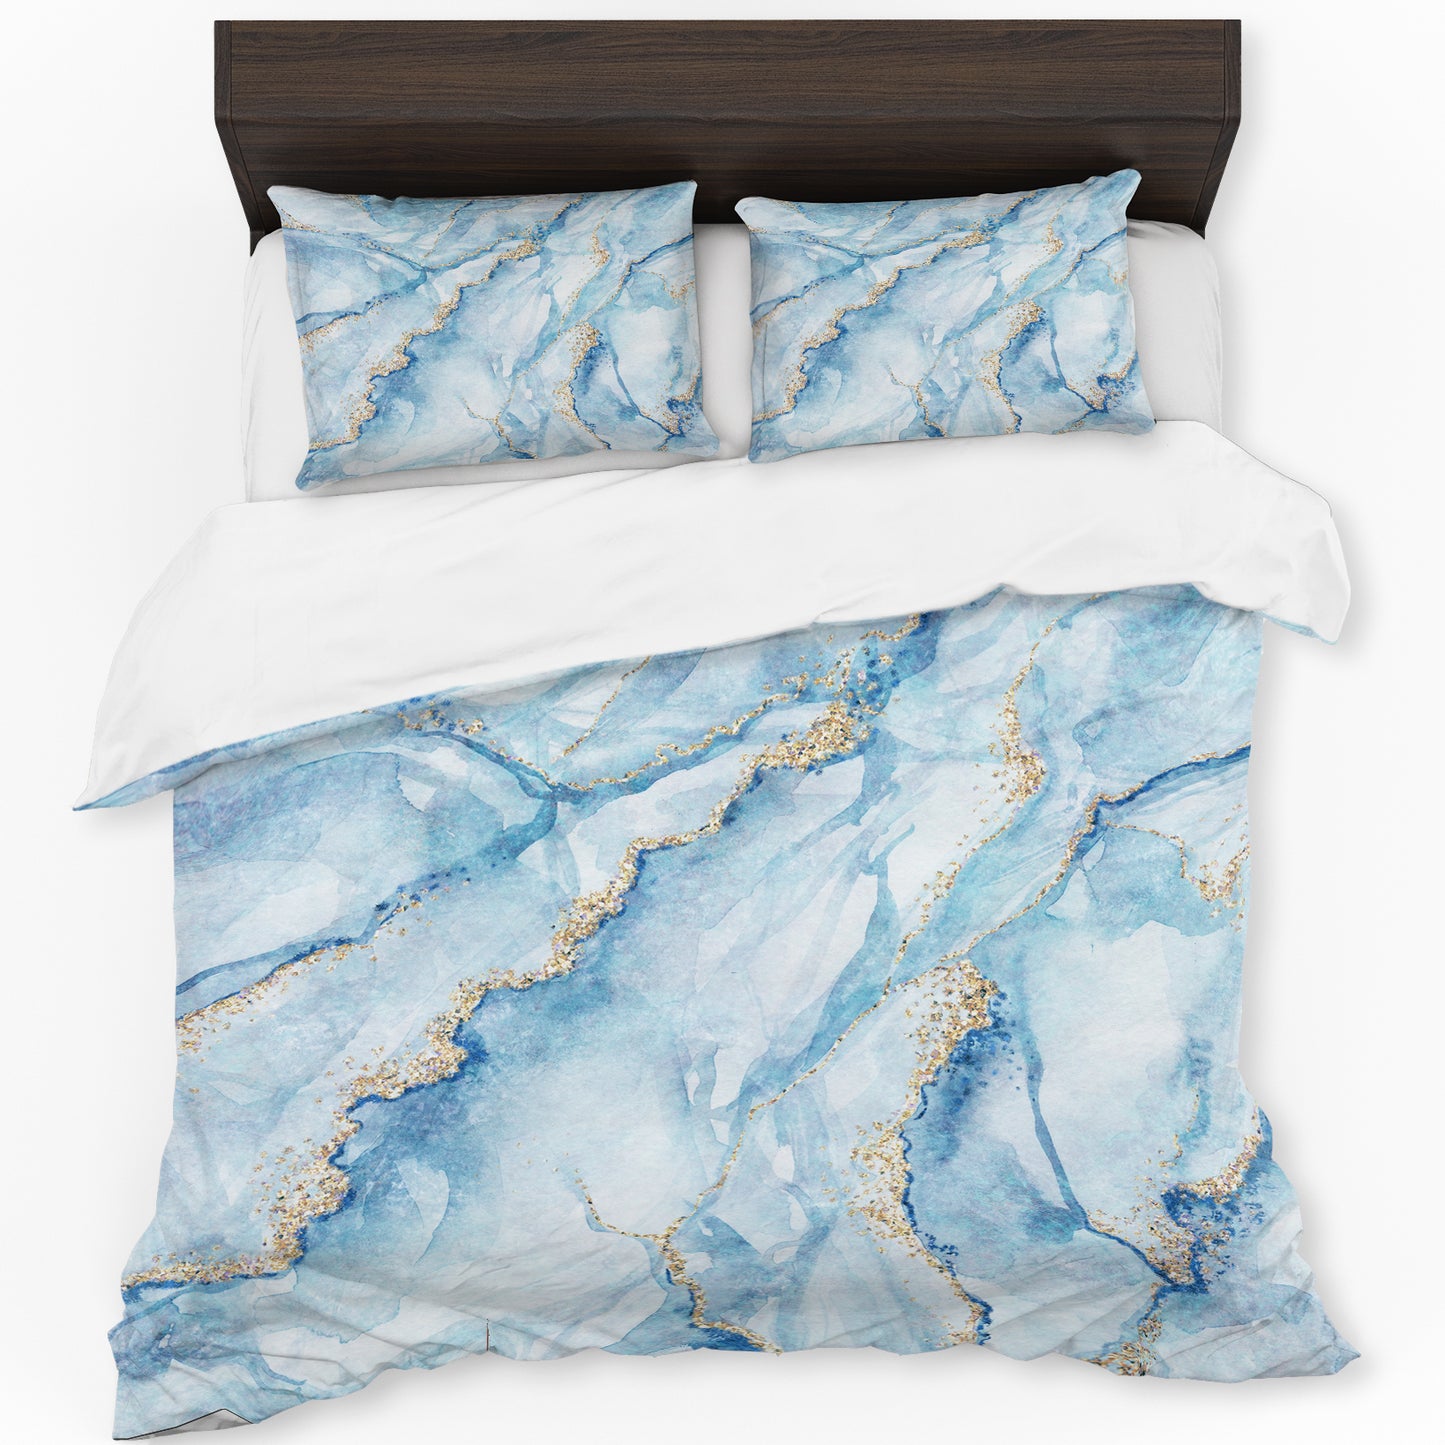 Gold and Blue Marble Duvet Cover Set